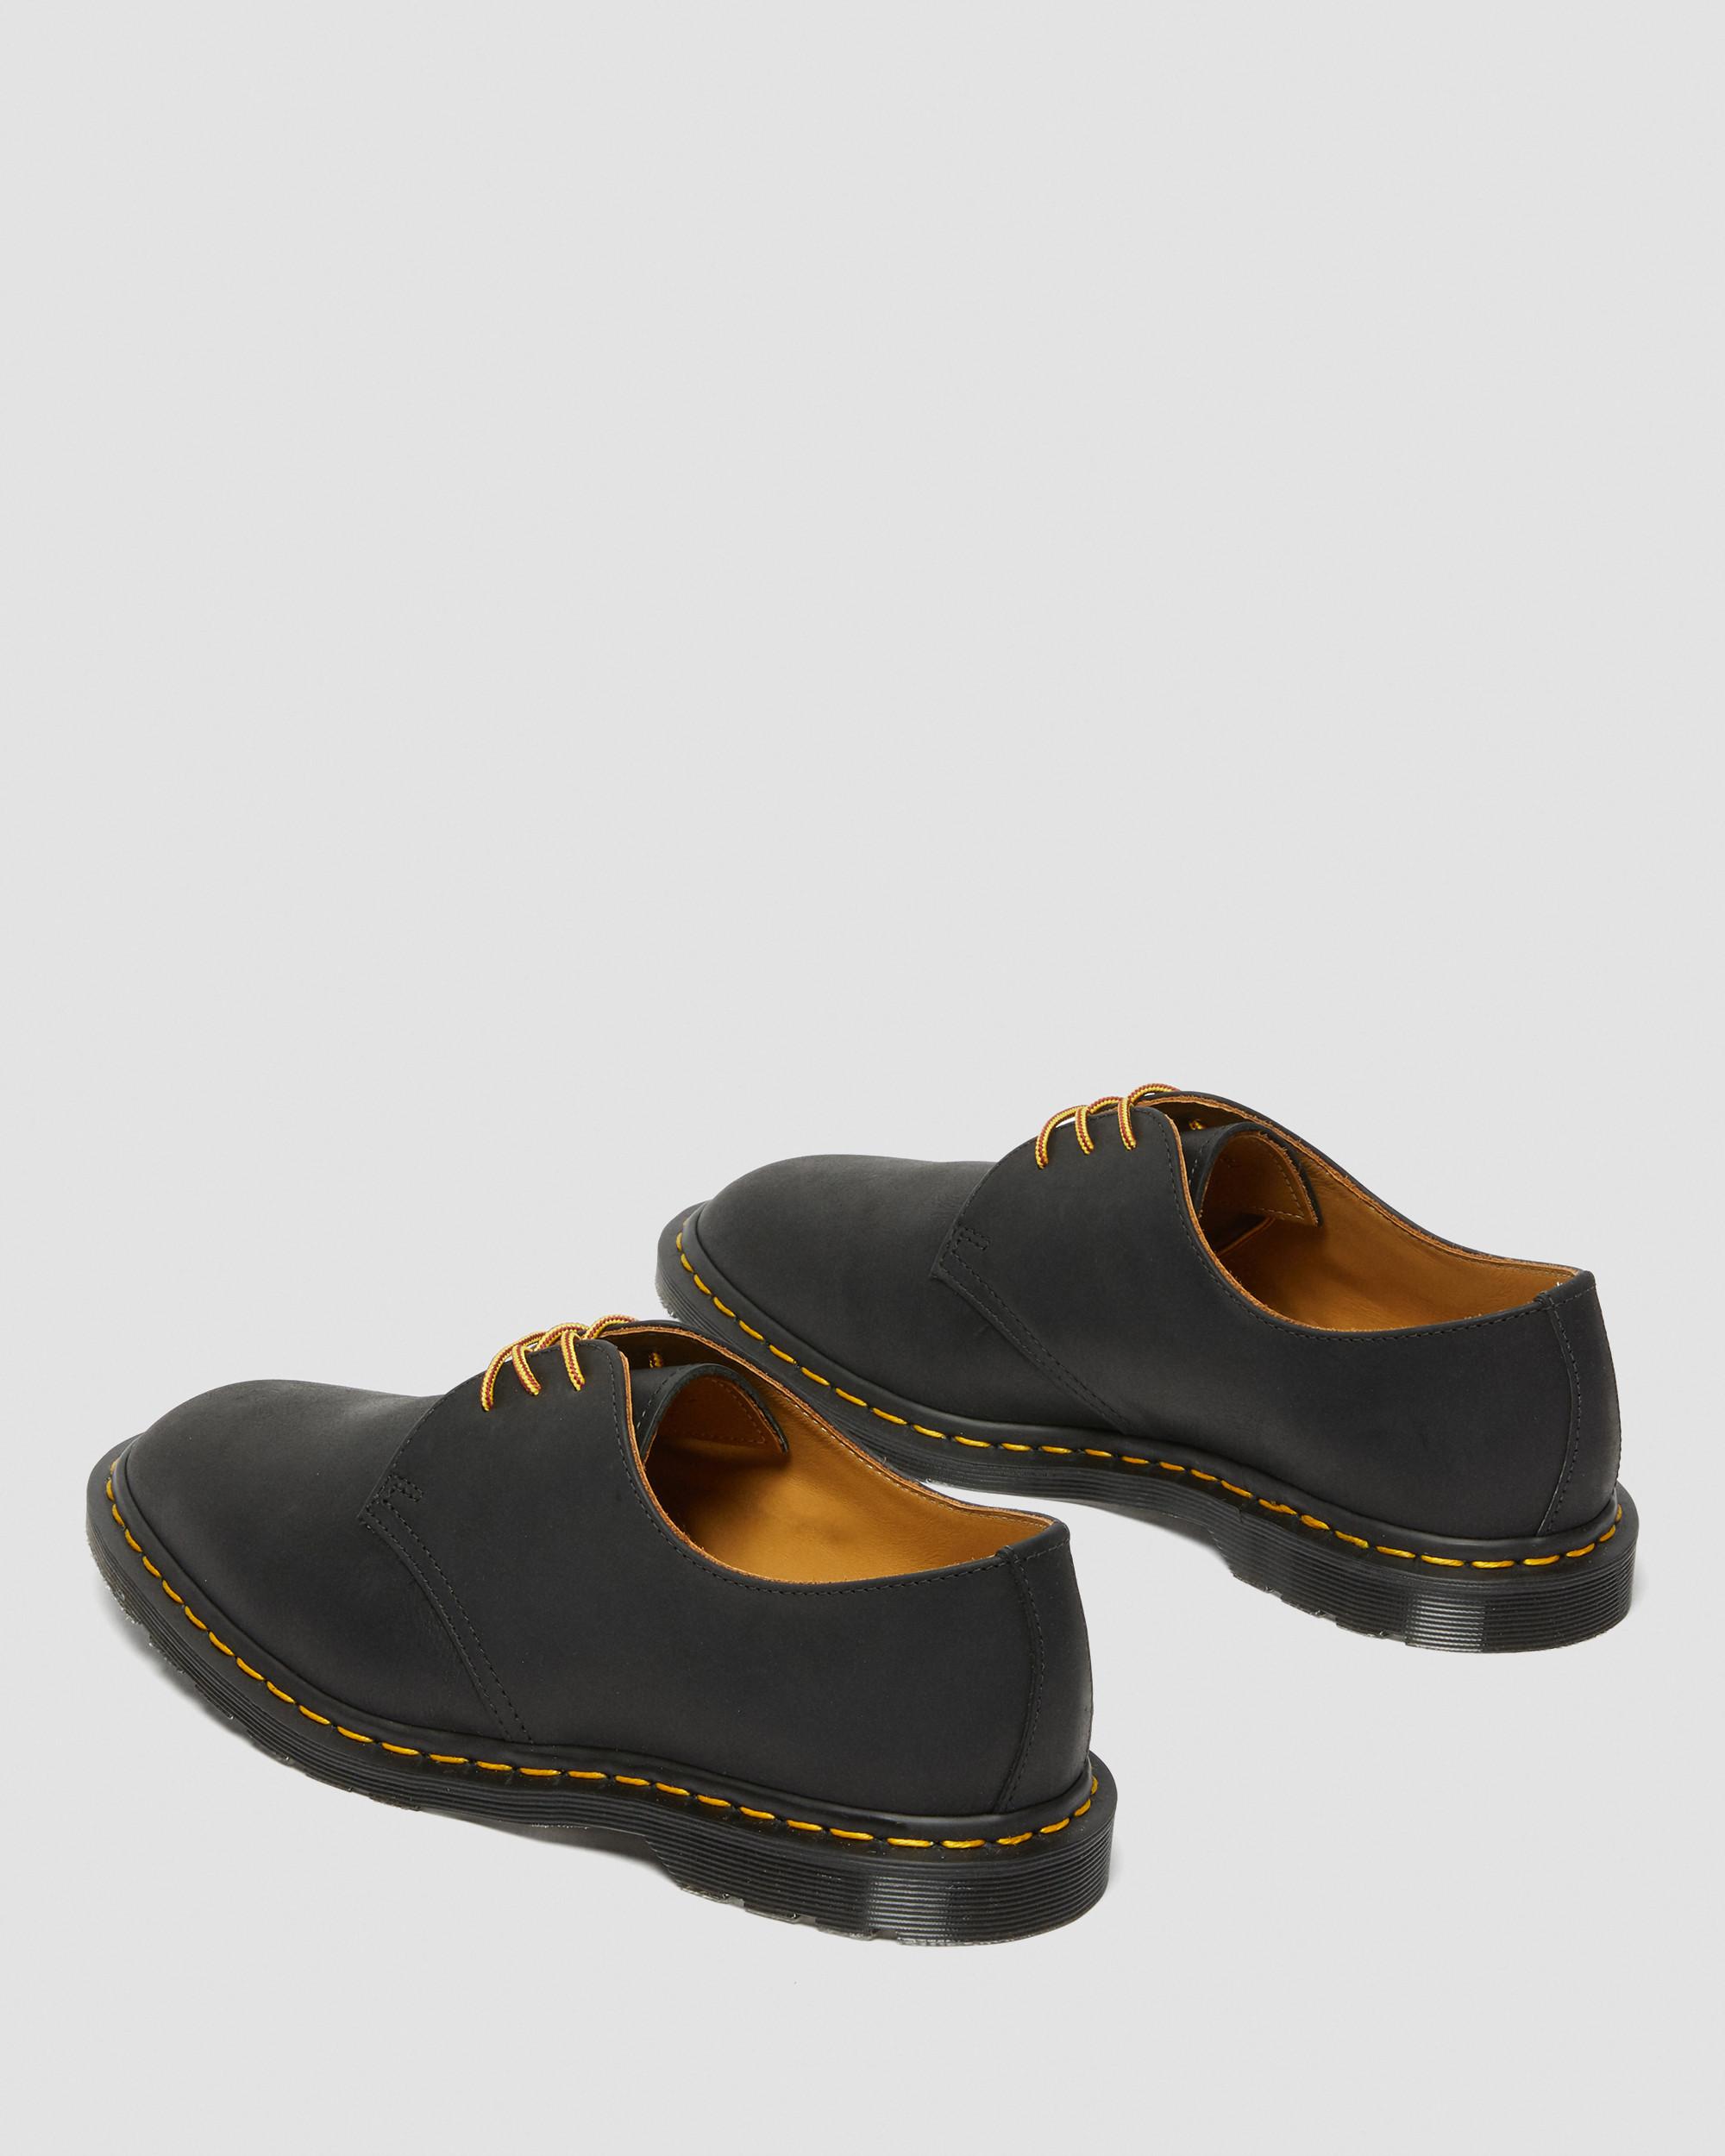 JJJJOUND ARCHIE II Wyoming Leather Shoes in Black